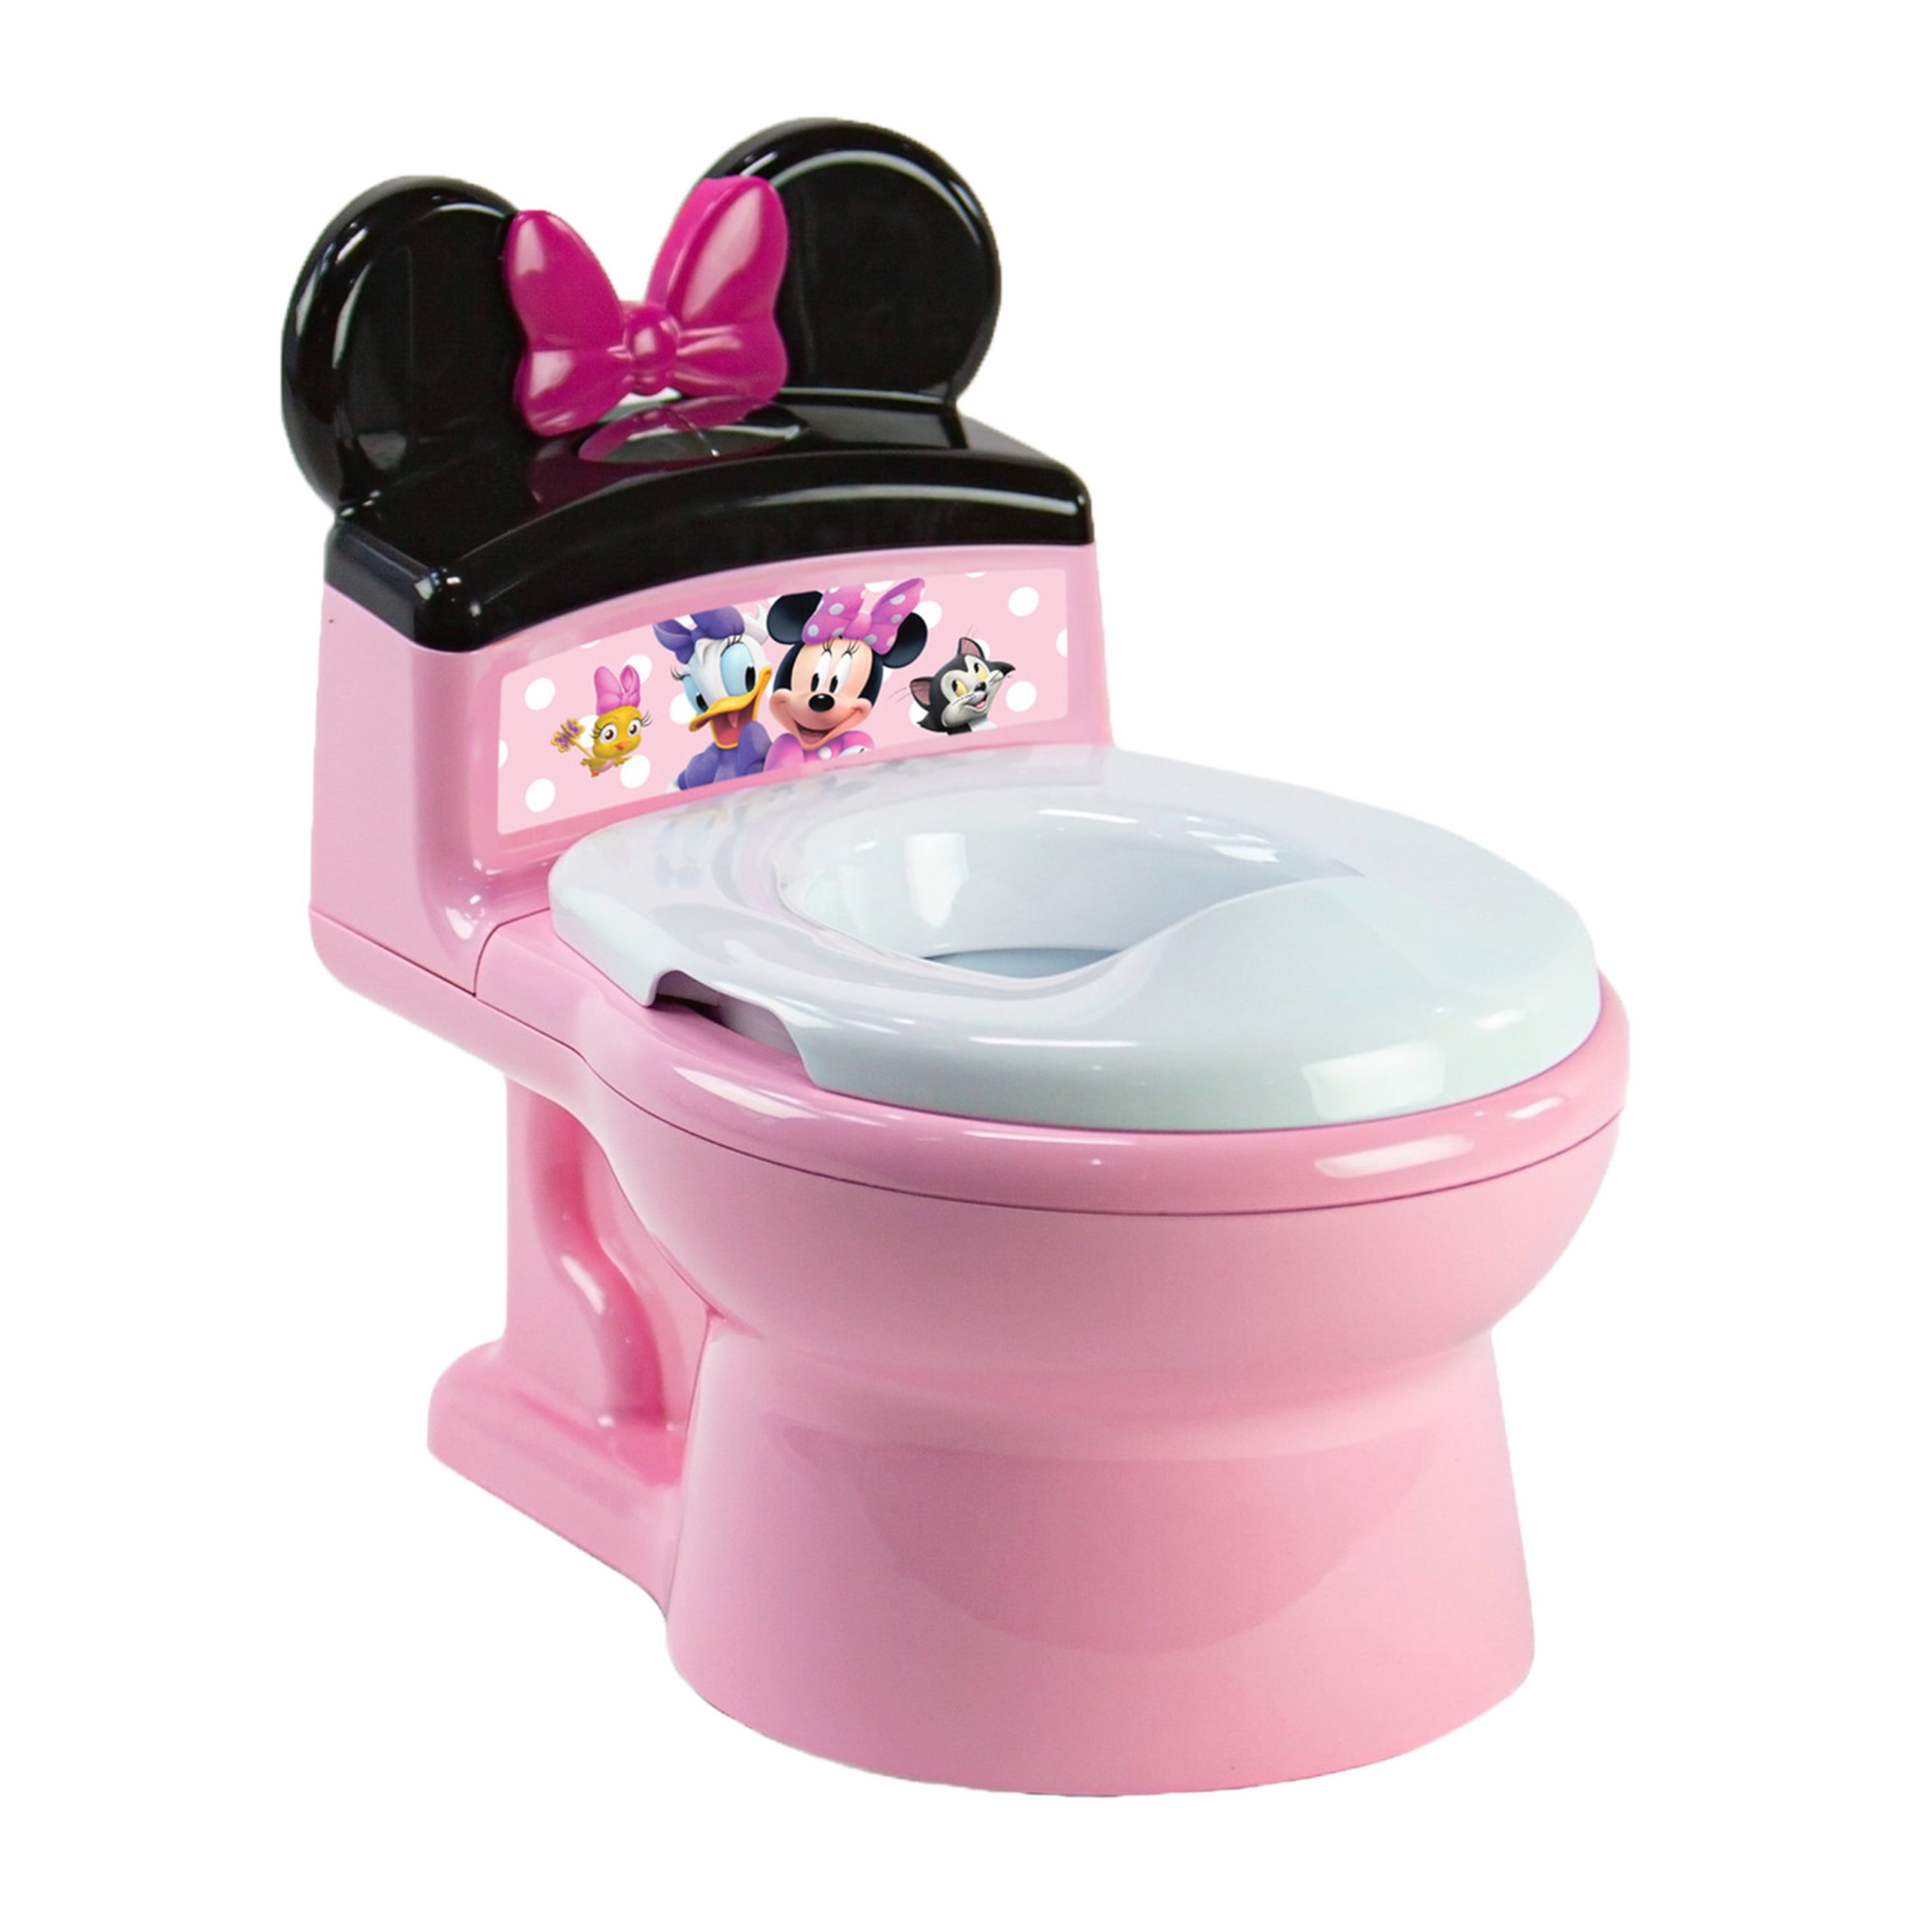 Disney ImaginAction Minnie Mouse 2-in-1 Potty Training Toilet, Toddler Toilet and Training Seat